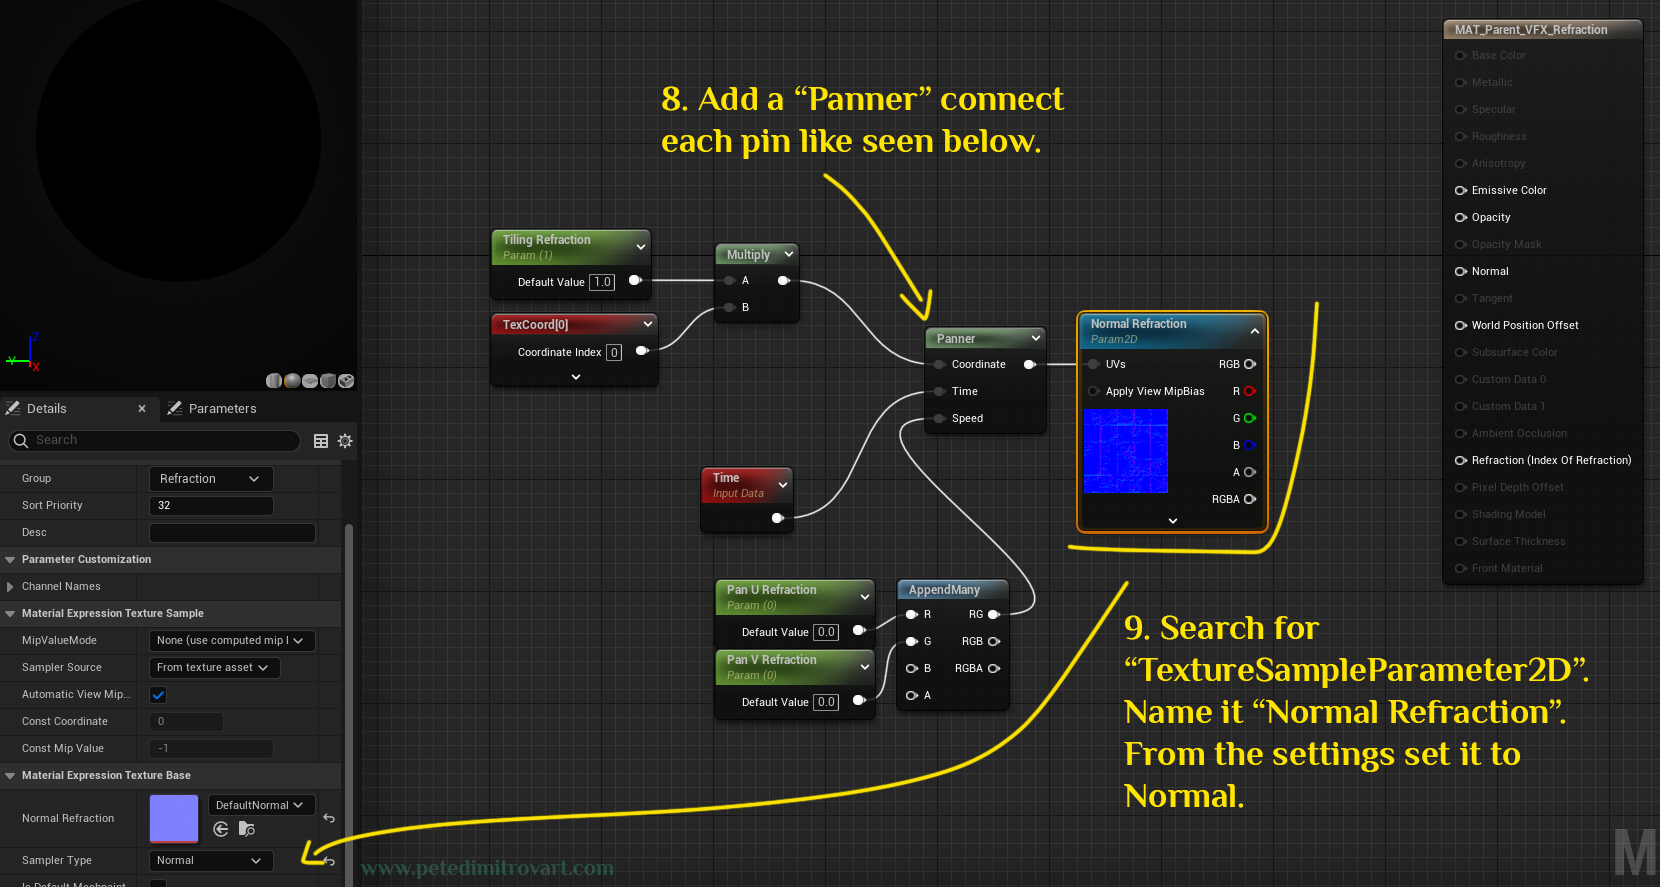 Screenshot showing adding a panner node that then connects into a “TextureSampleParameter2D” that is renamed to “Normal Refraction”.